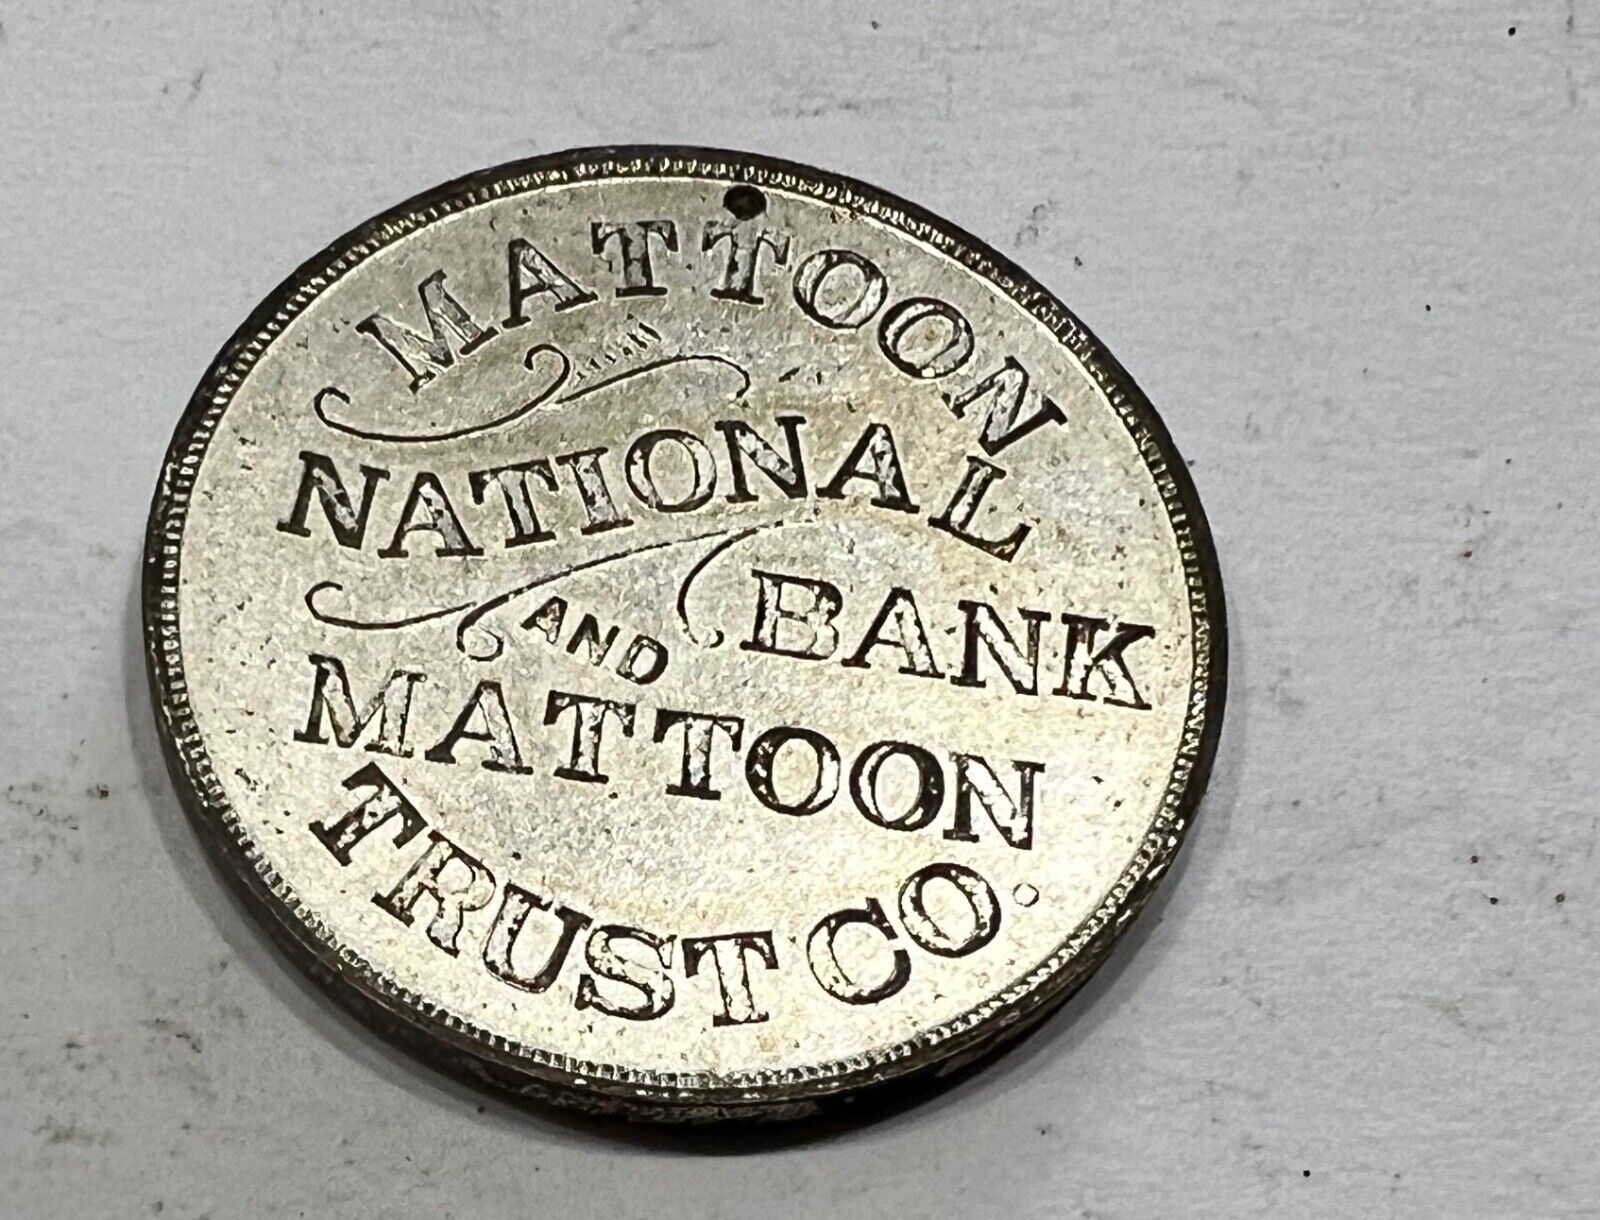 MATTOON IL National BANK & TRUST CO adv TOKEN COIN age?